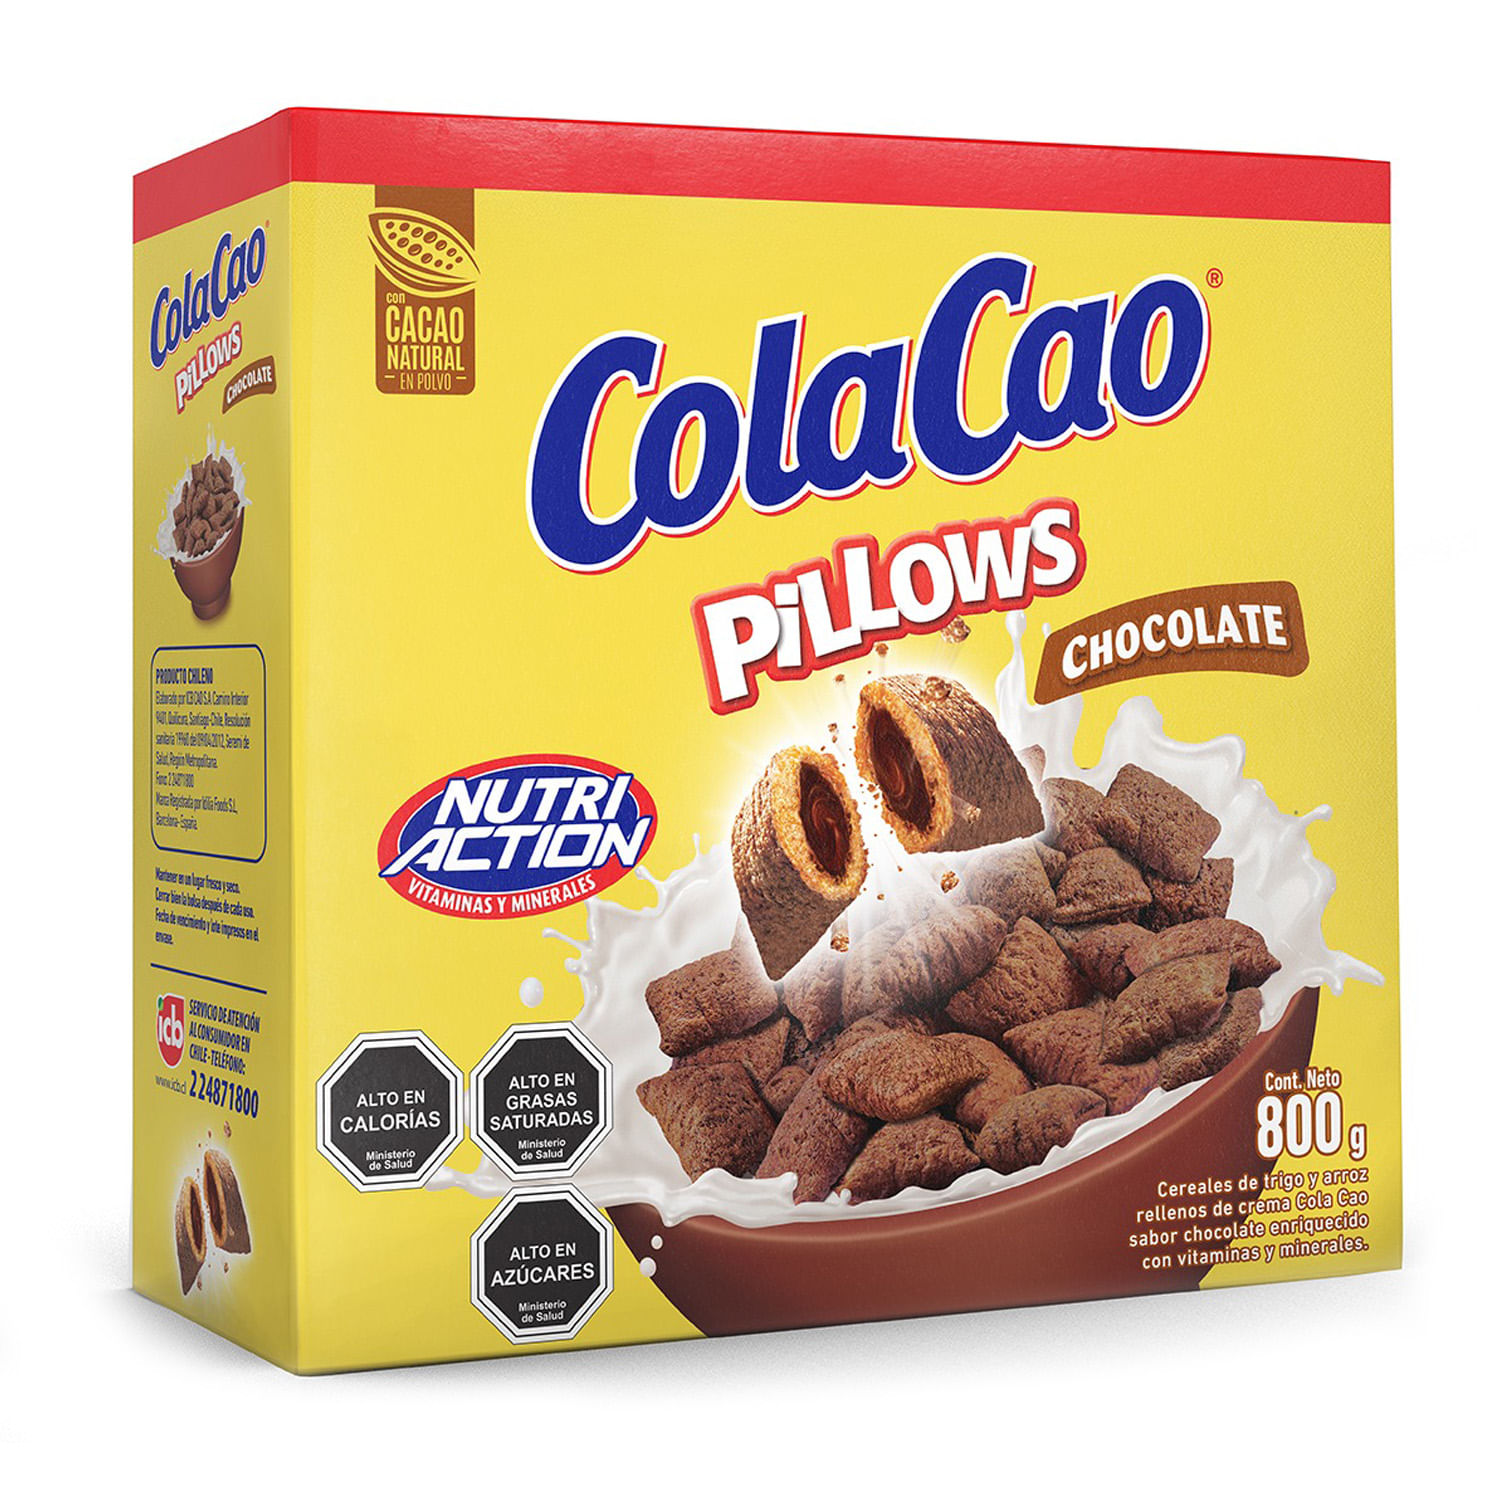 Cereal Colacao pillows chocolate 720g